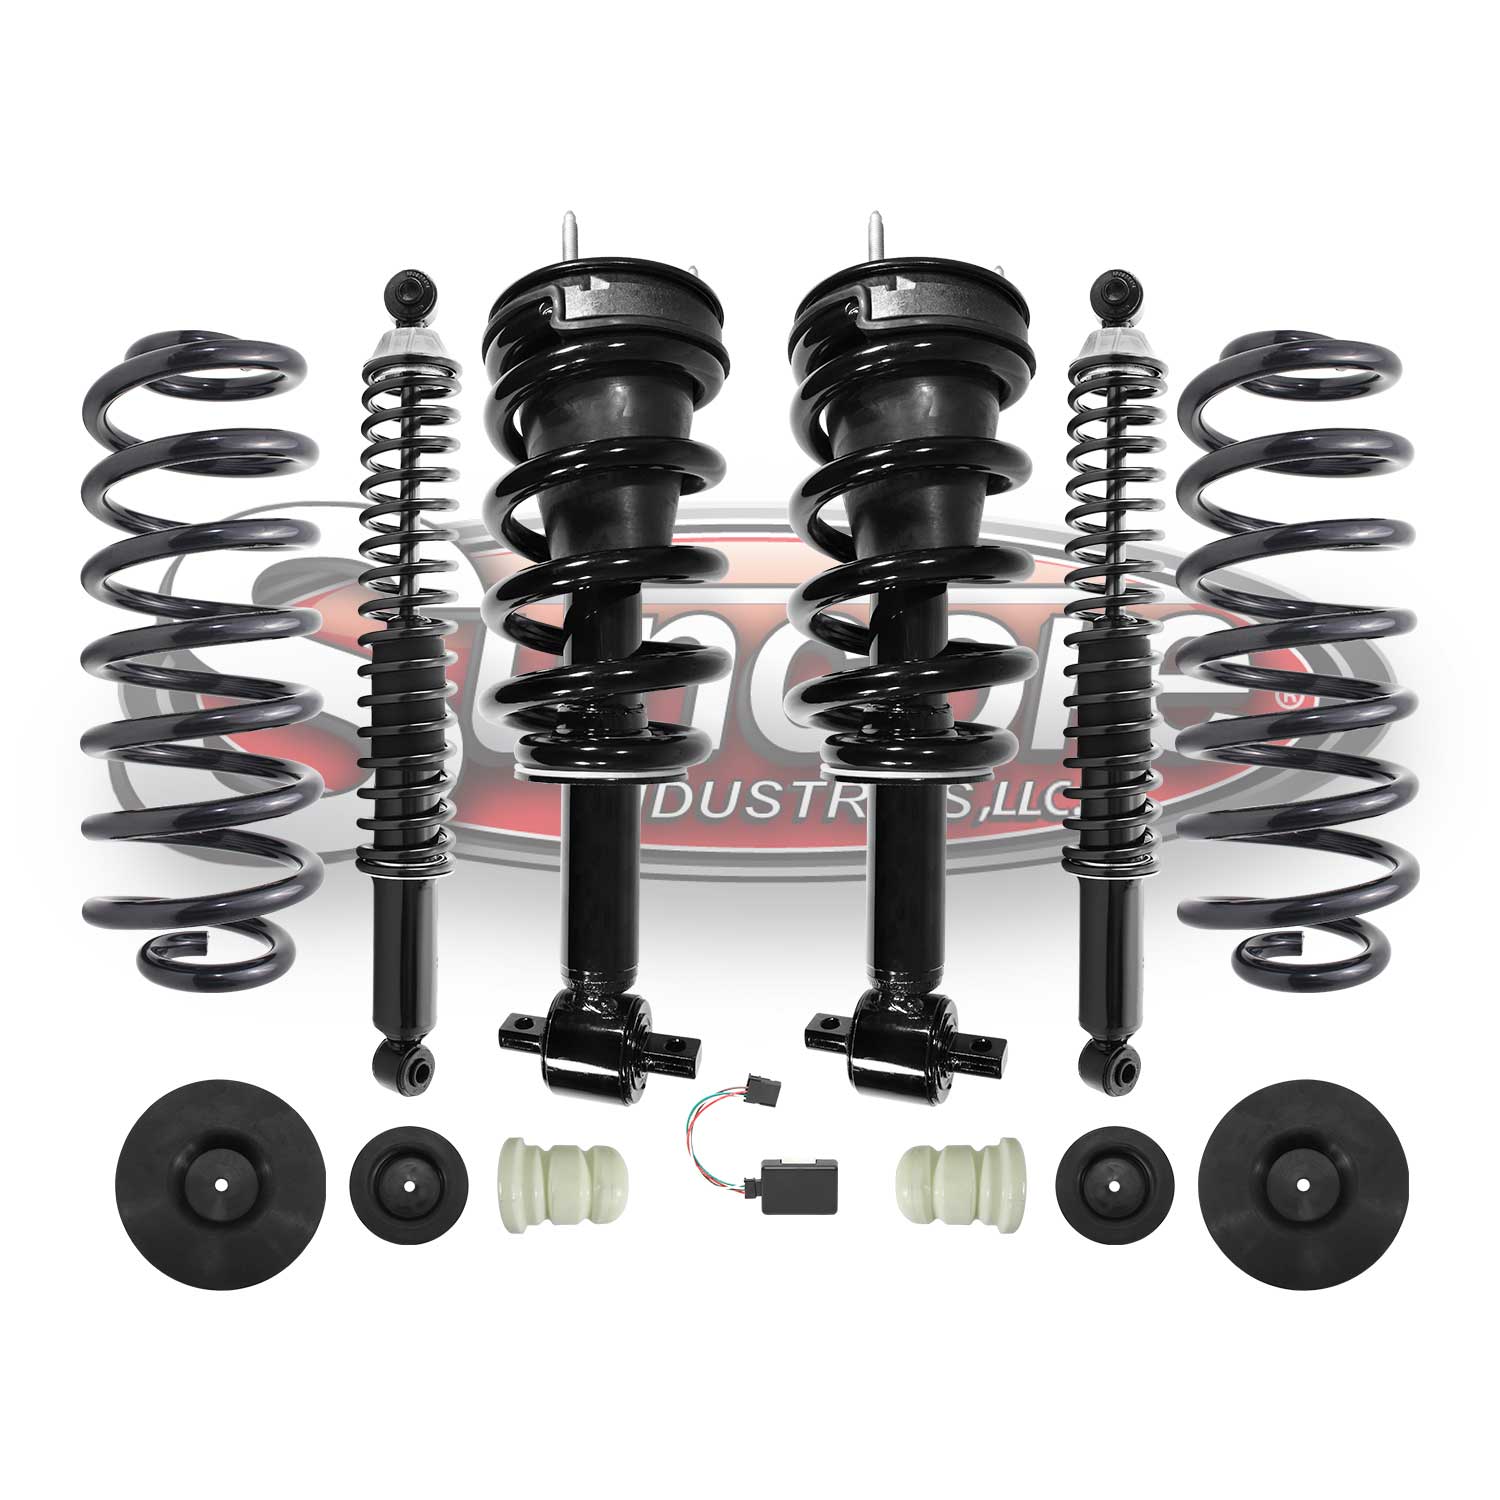 Air to Complete Strut & Coil Conversion Kit - 2007-2014 Cadillac Chevy GMC LWB